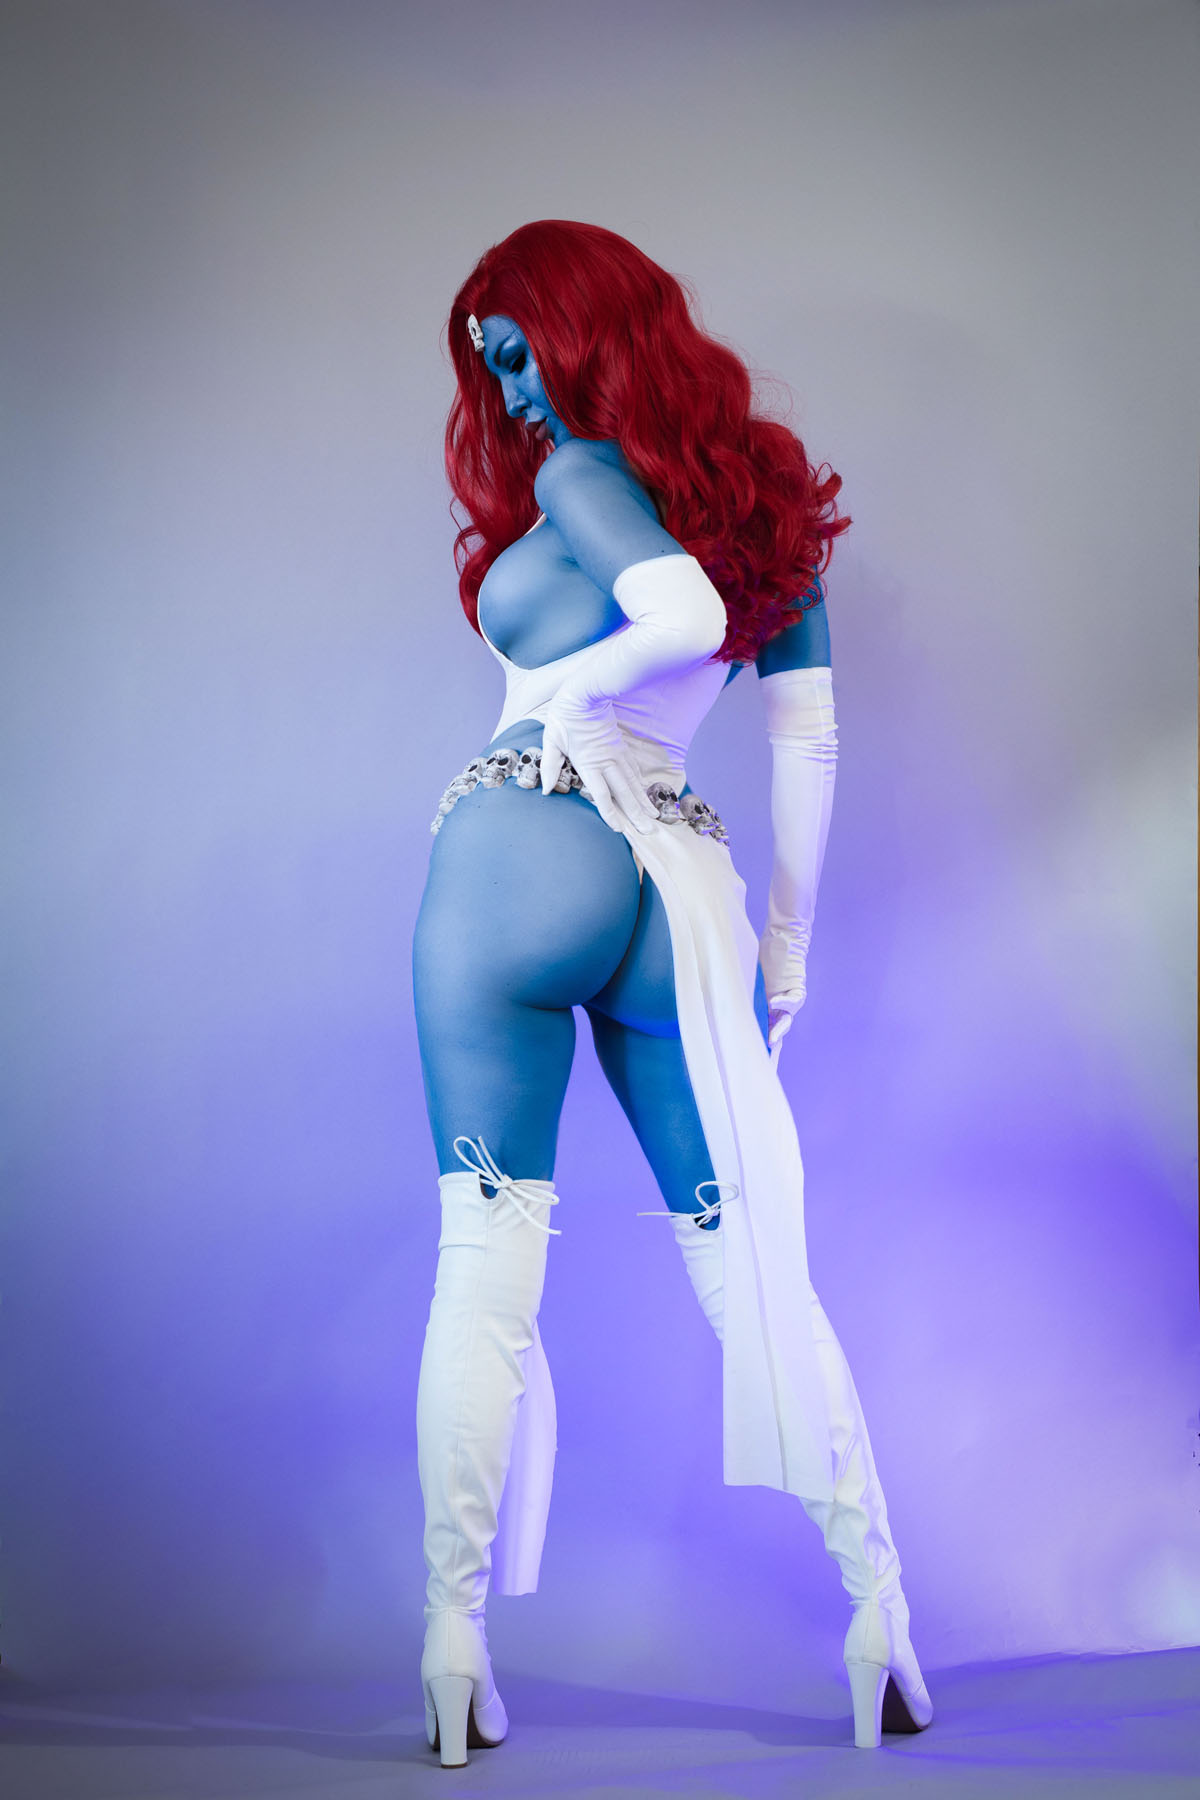 Mystique Cosplay Part 2: Wearing the Costume #7